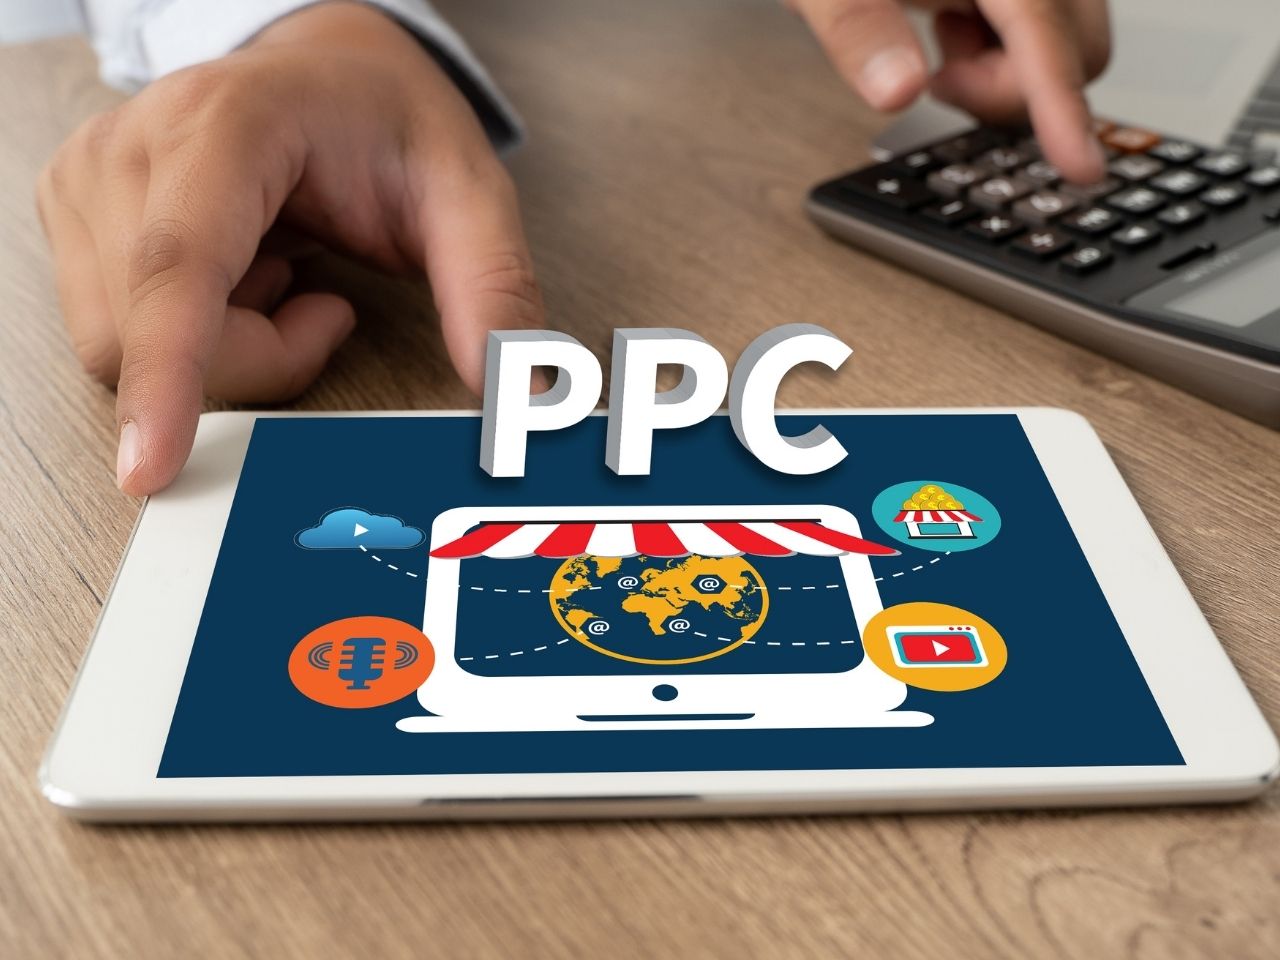 PPC on white tablet